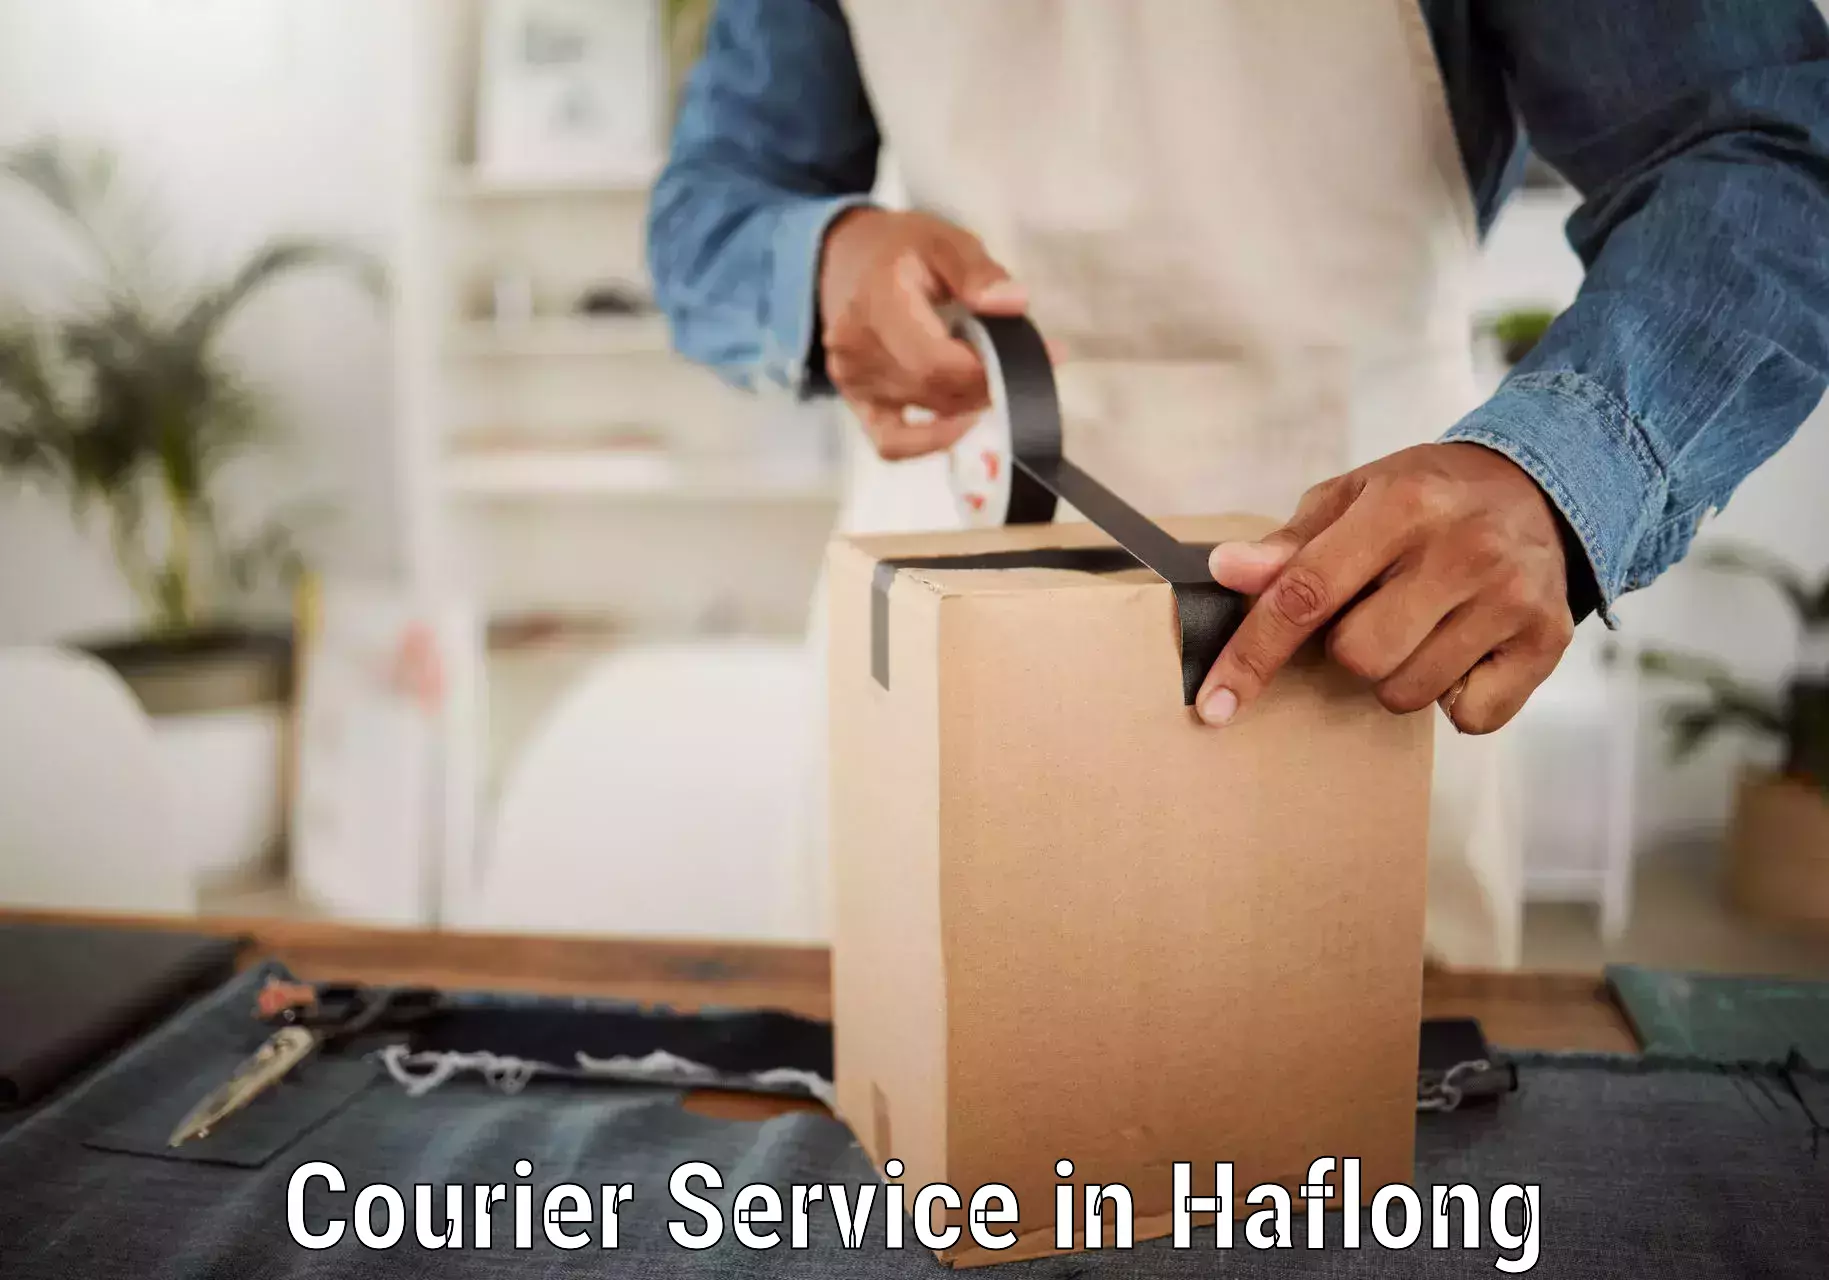 Flexible delivery schedules in Haflong